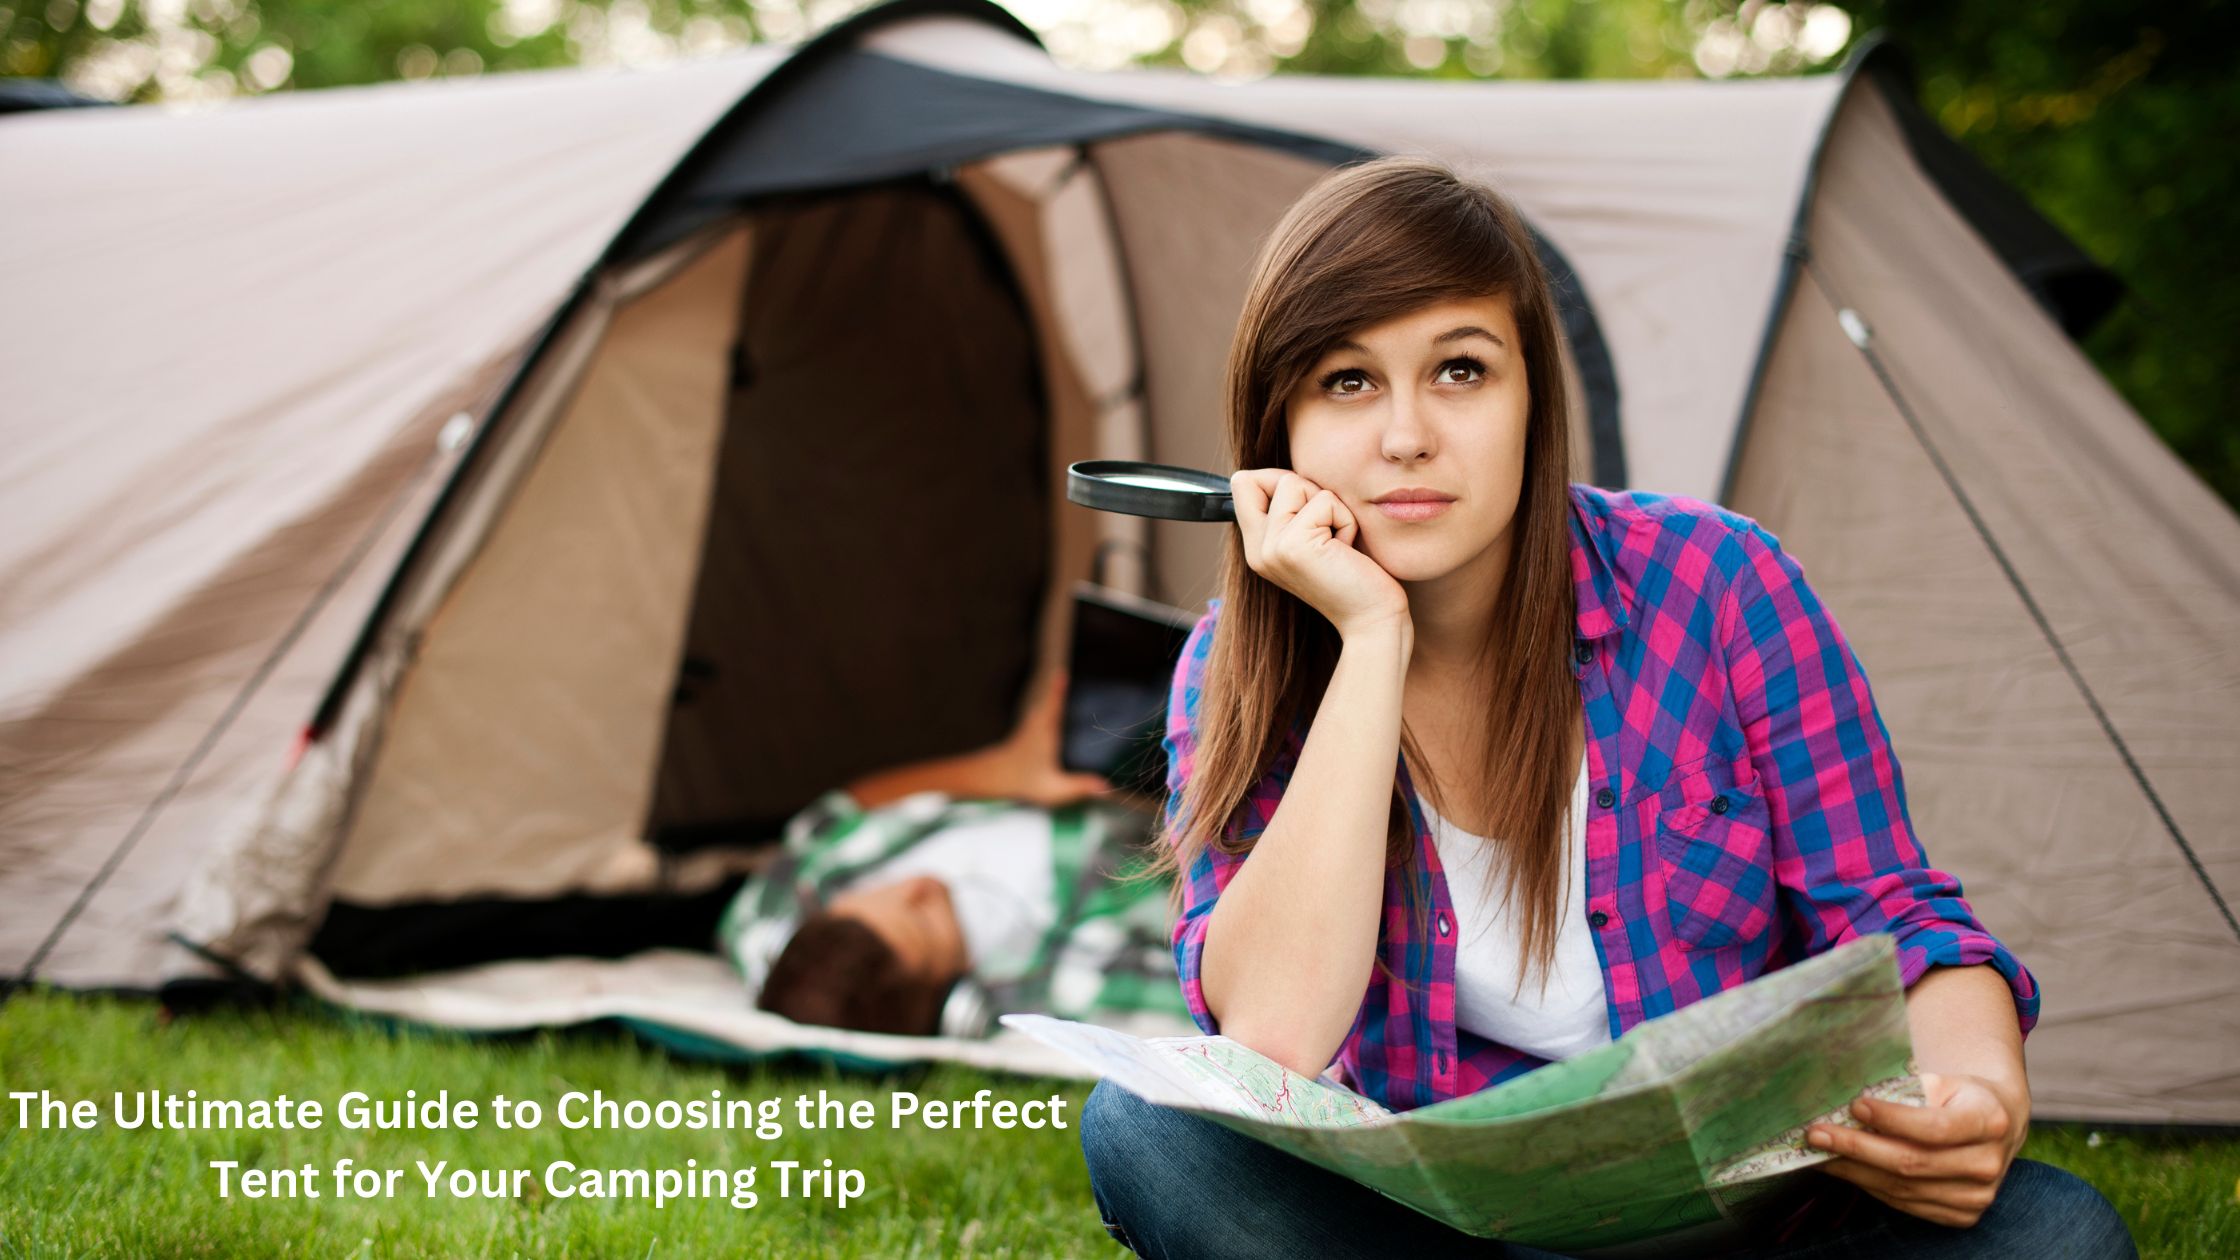 The Ultimate Guide to Choosing the Perfect Tent for Your Camping Trip